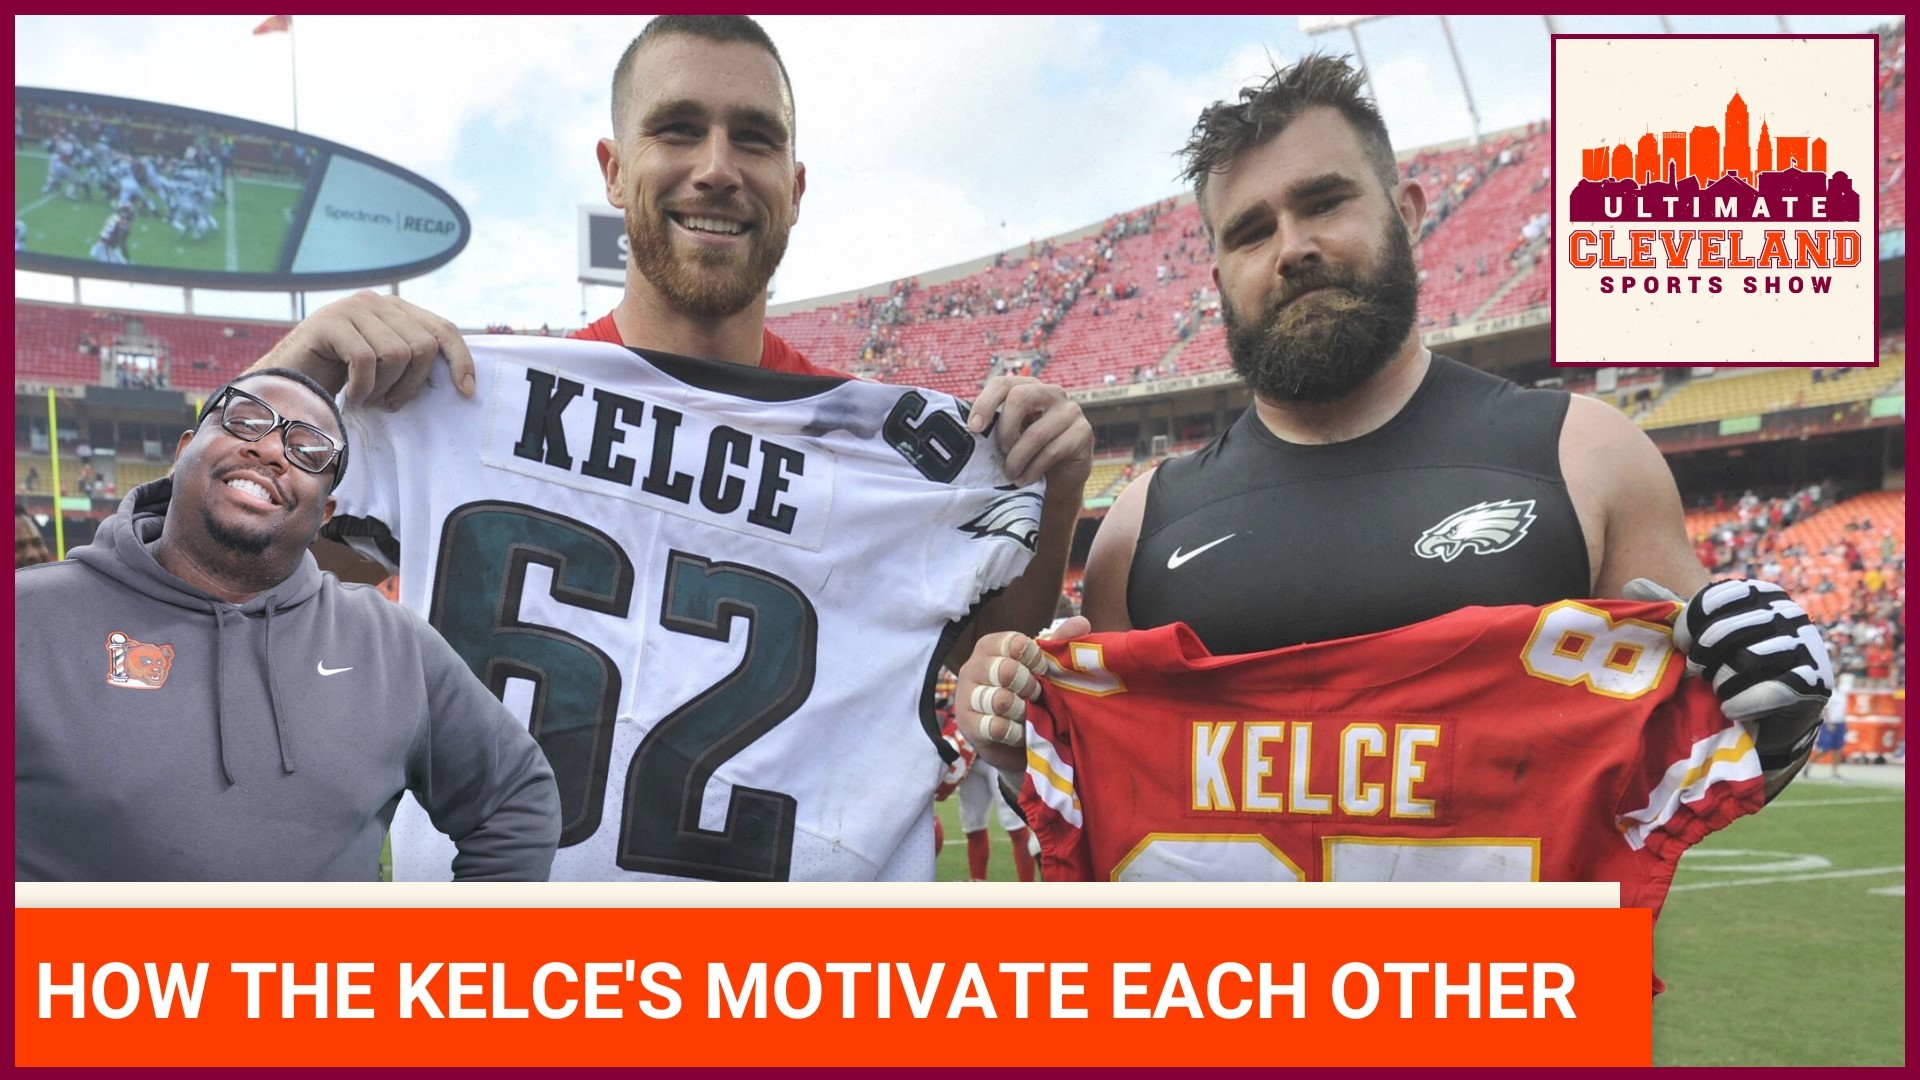 How much of an impact did Jason Kelce have in saving Travis Kelce's career?